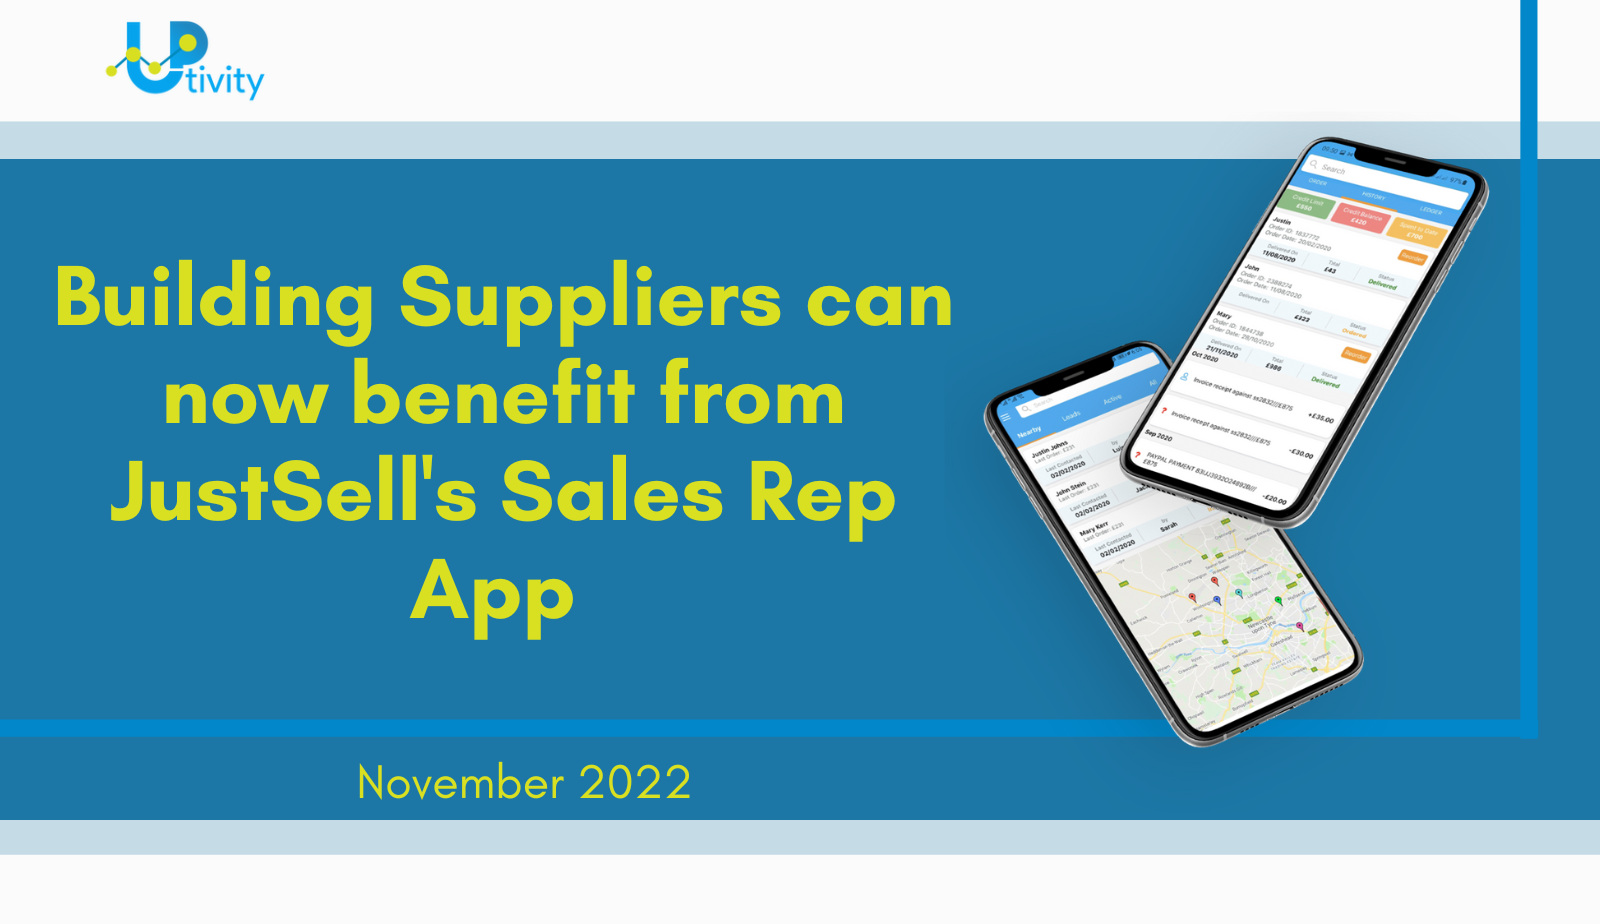 Building Suppliers can now benefit from JustSell's Sales Rep App as part of B2B Wholesale Ecommerce platform